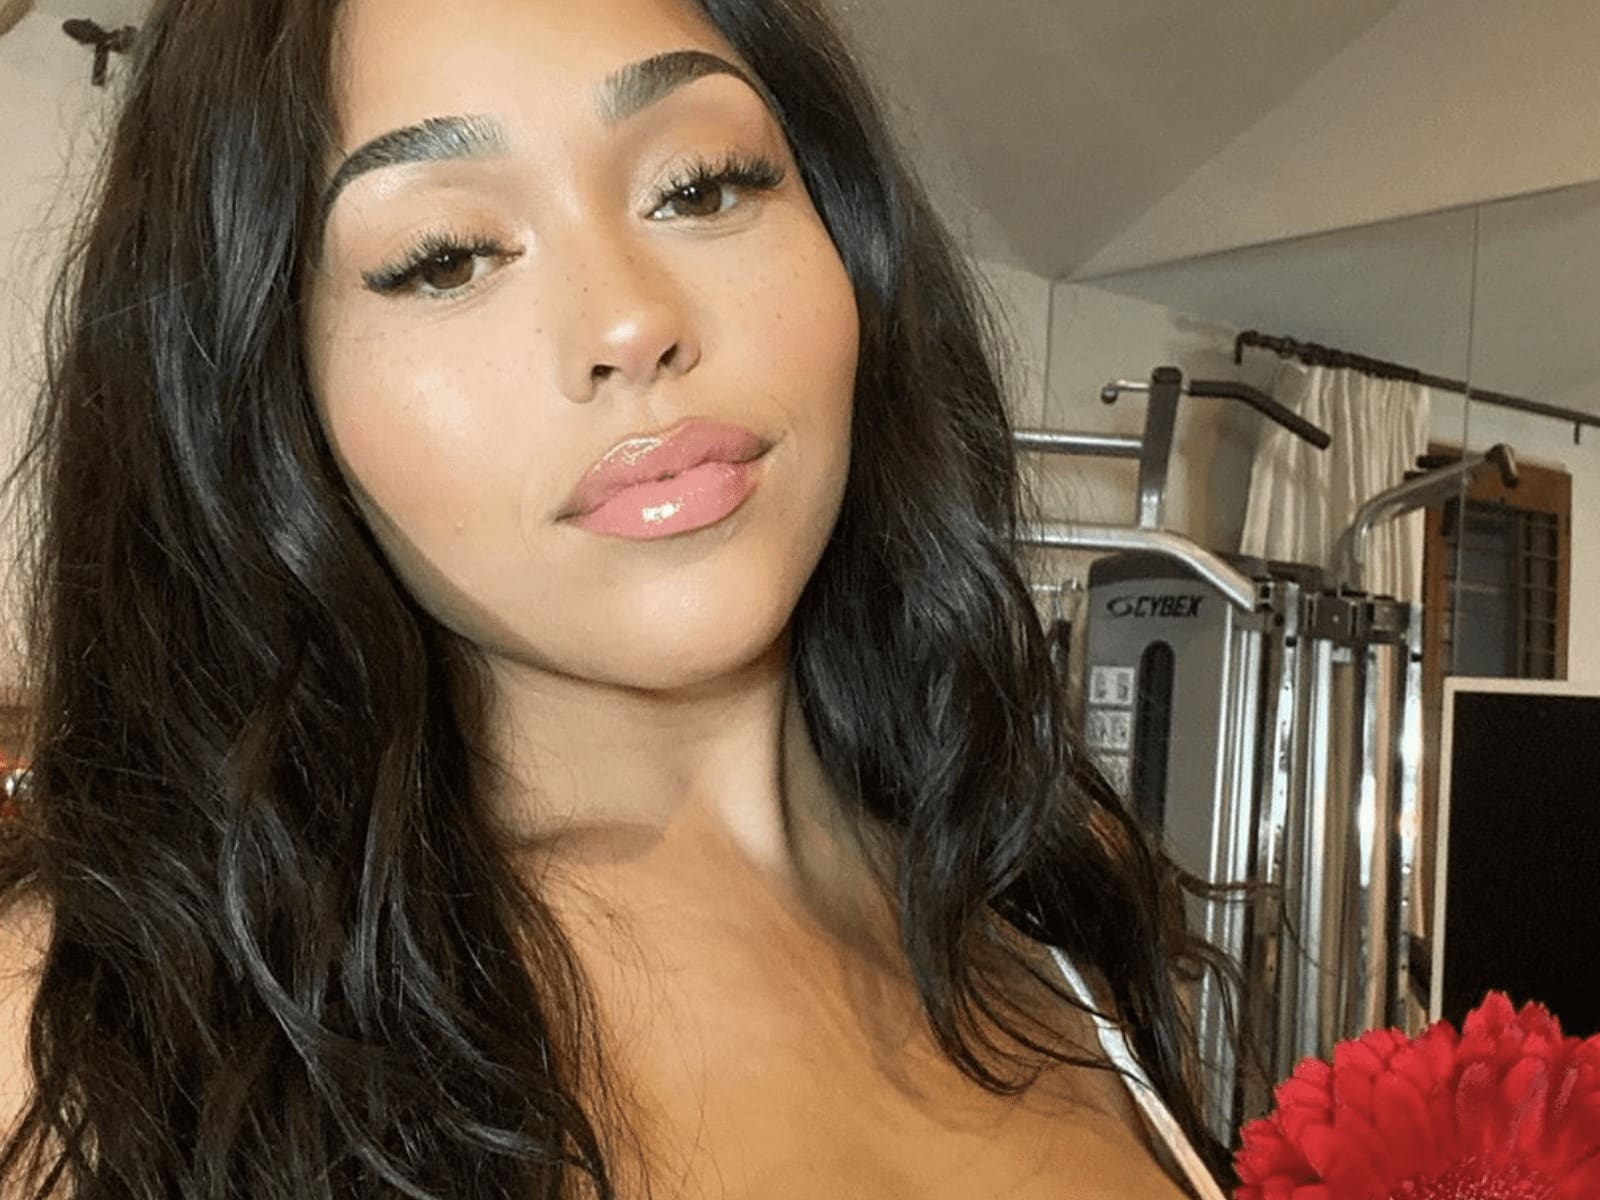 Jordyn Woods Comes Home Form Her Distraction/Work Trip: 'Is Life Even Real Right Now?'